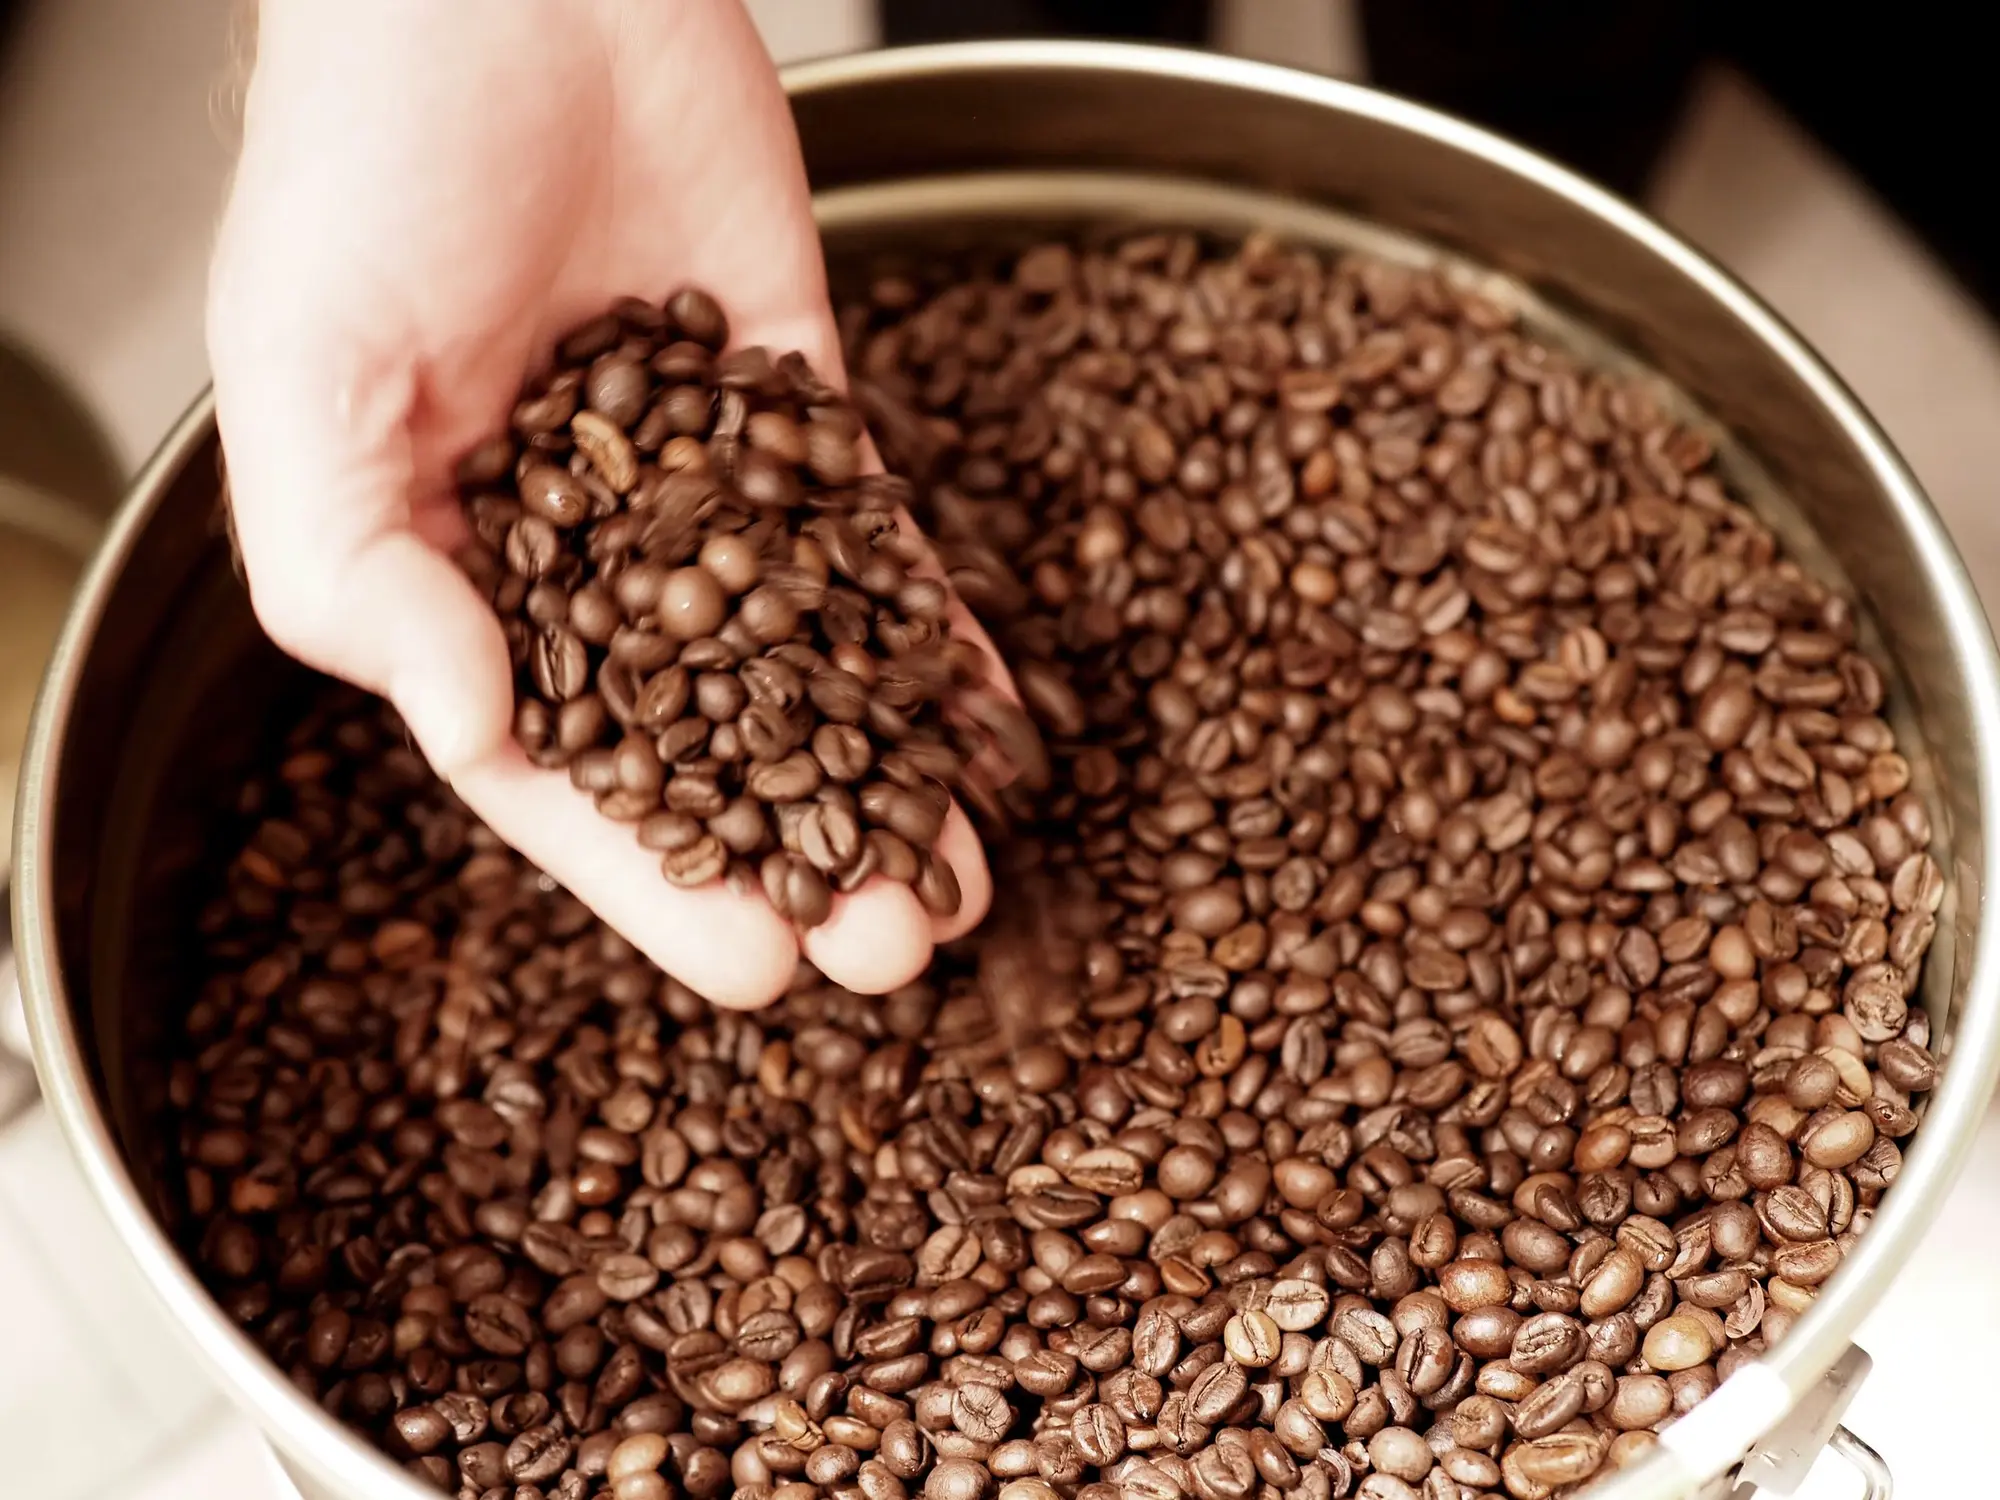 Roasted coffee beans in the in-house coffee roastery (c) photo Platzhirsch Kufstein